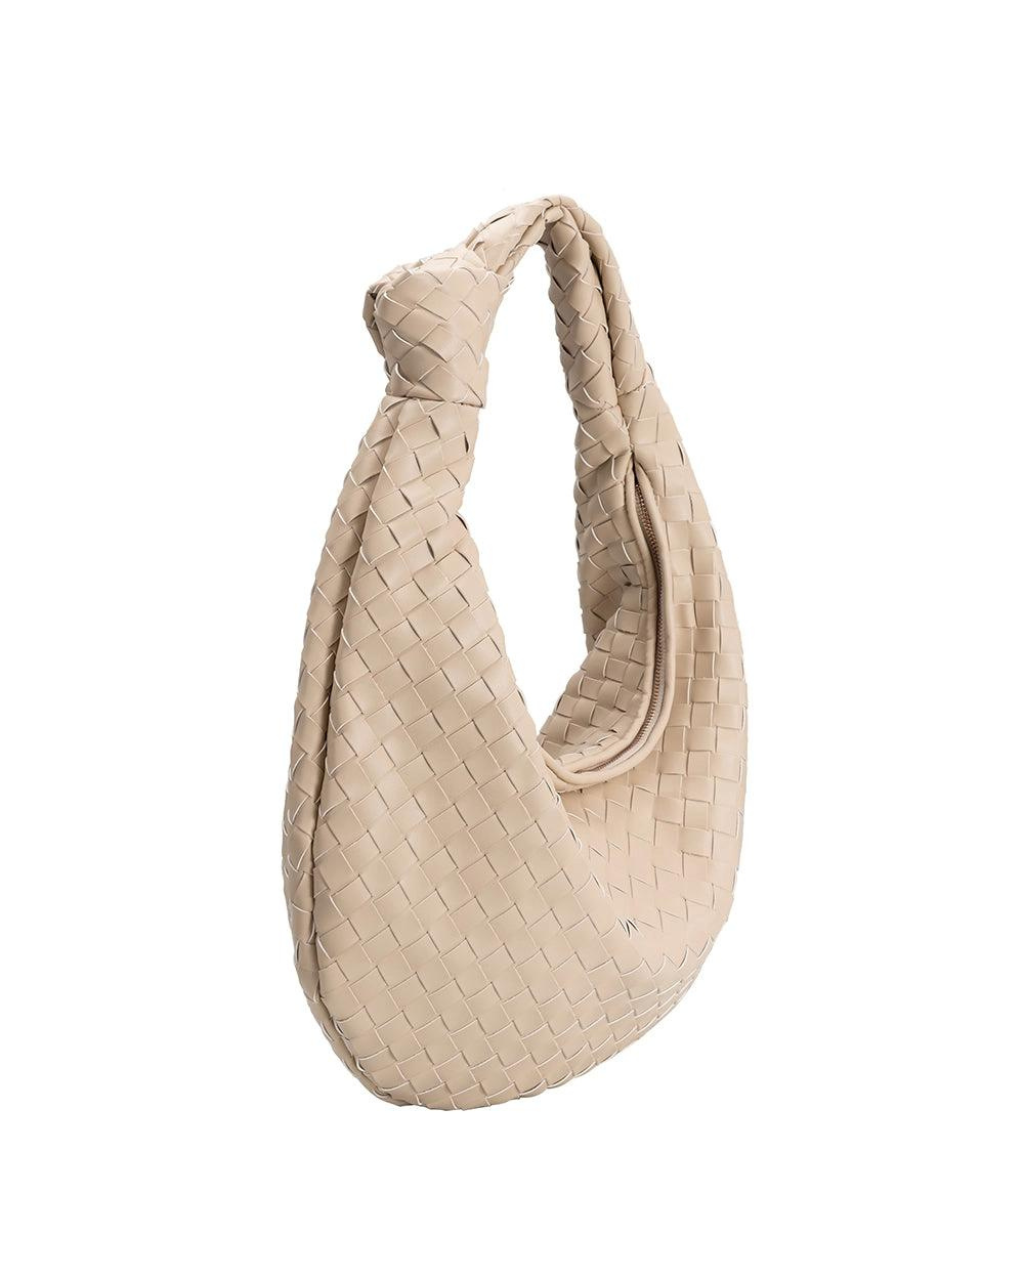 Katherine Chai Recycled Bag, Daytime Bag by Melie Bianco | LIT Boutique